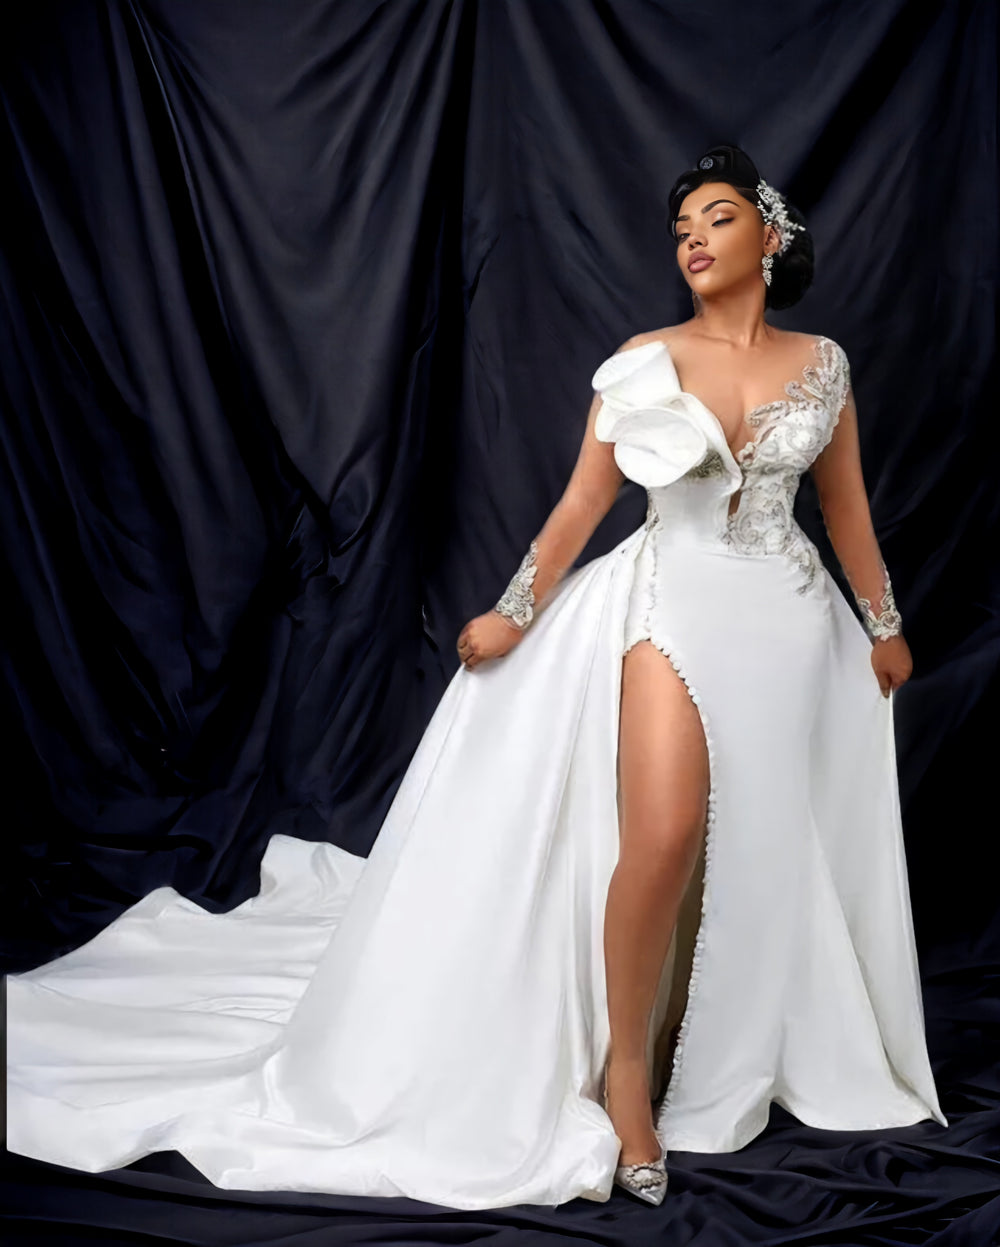 Elegance Enthroned: Plus Size Satin Mermaid Bridal Gown with Lace Appliqué and Detachable Train